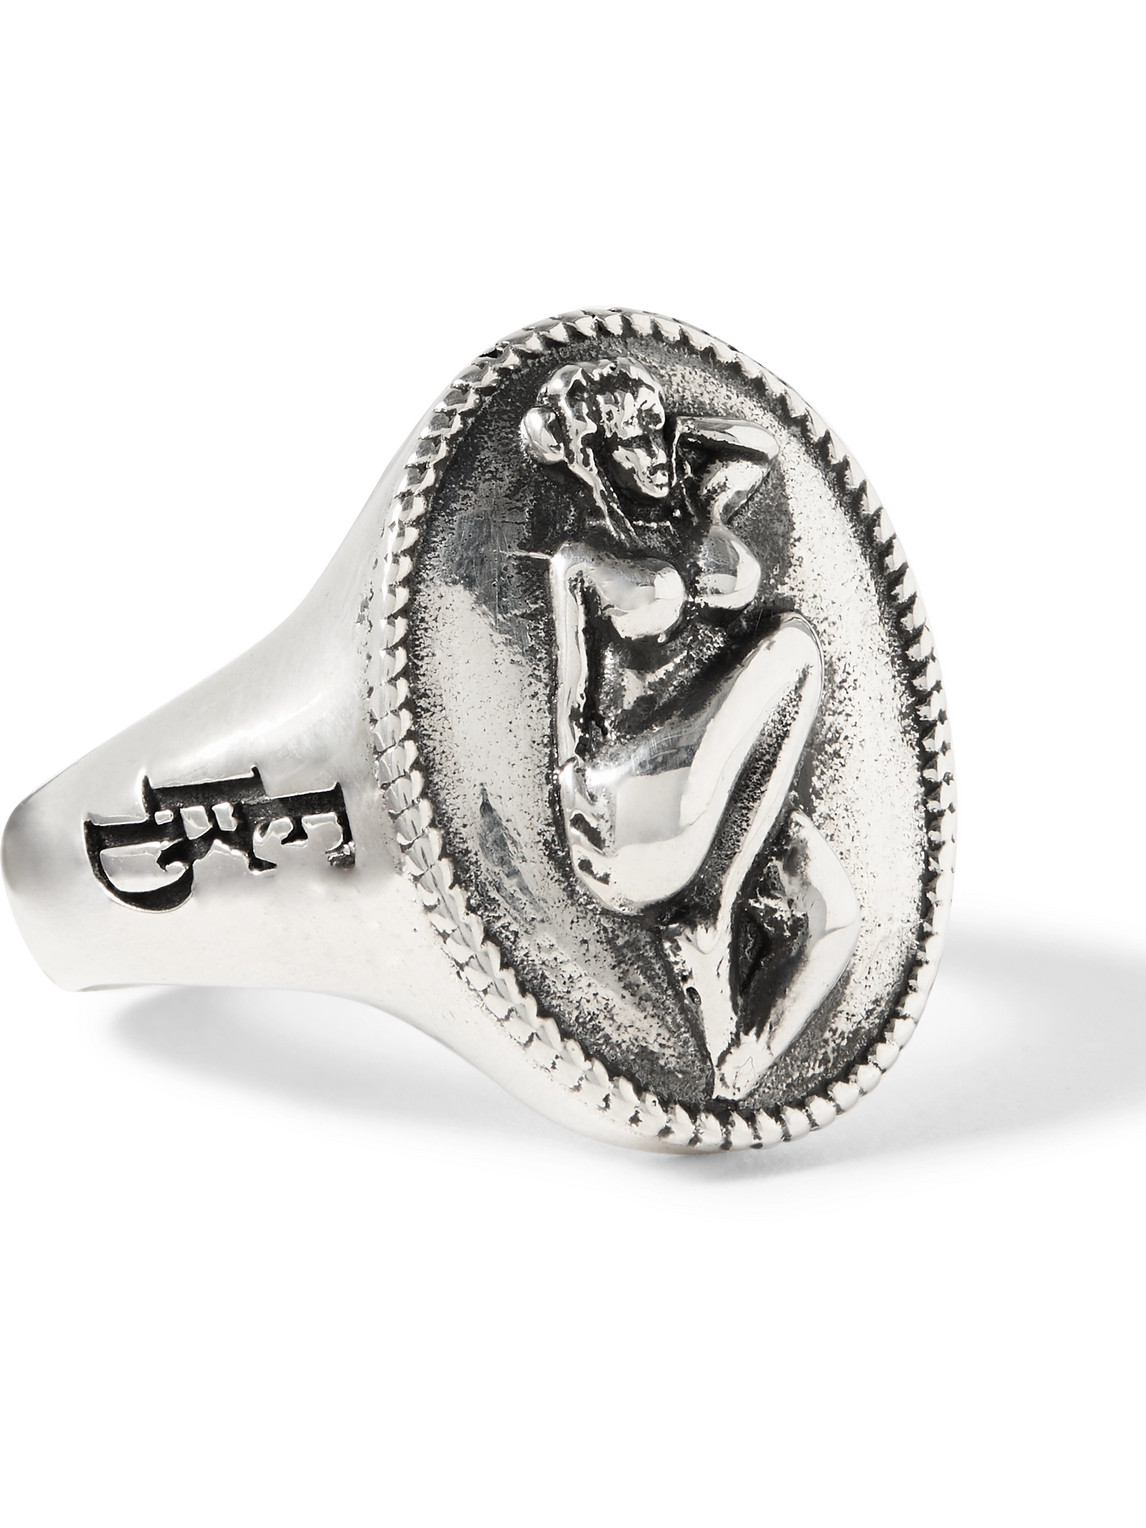 Enfants Riches Deprimes Pin Up Girl Cameo Silver Ring